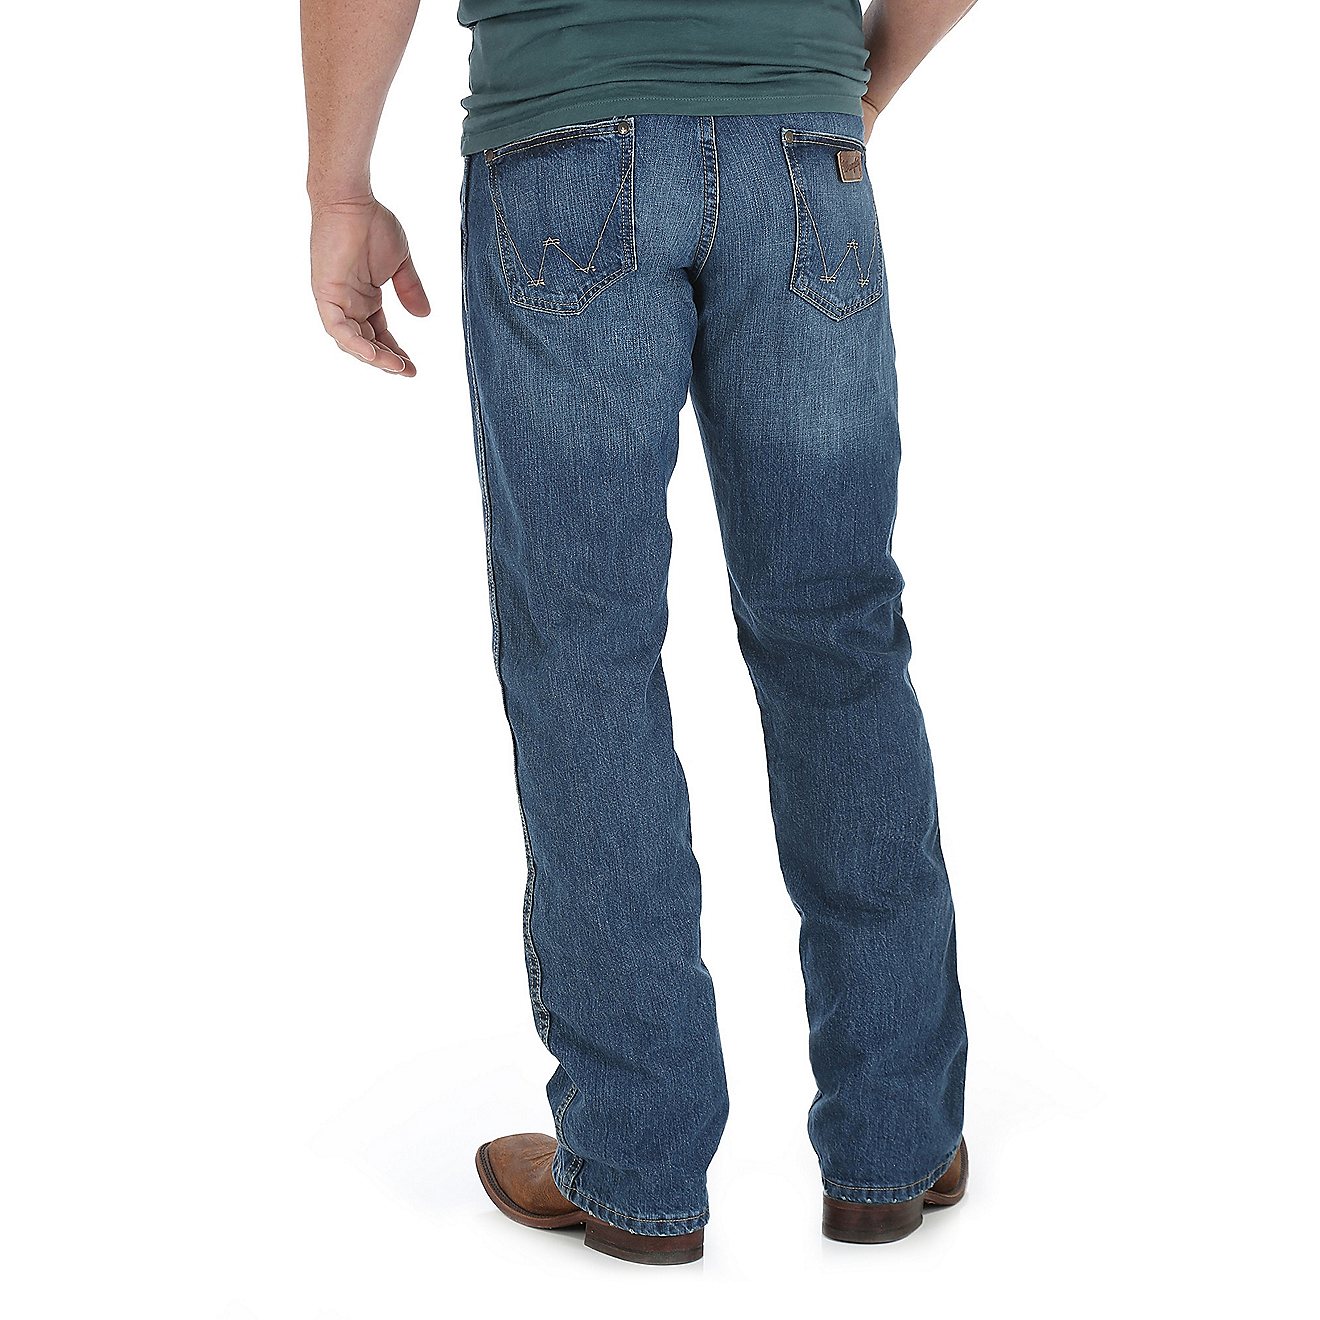 Wrangler Men's Retro Relaxed Fit Boot Cut Jeans                                                                                  - view number 2